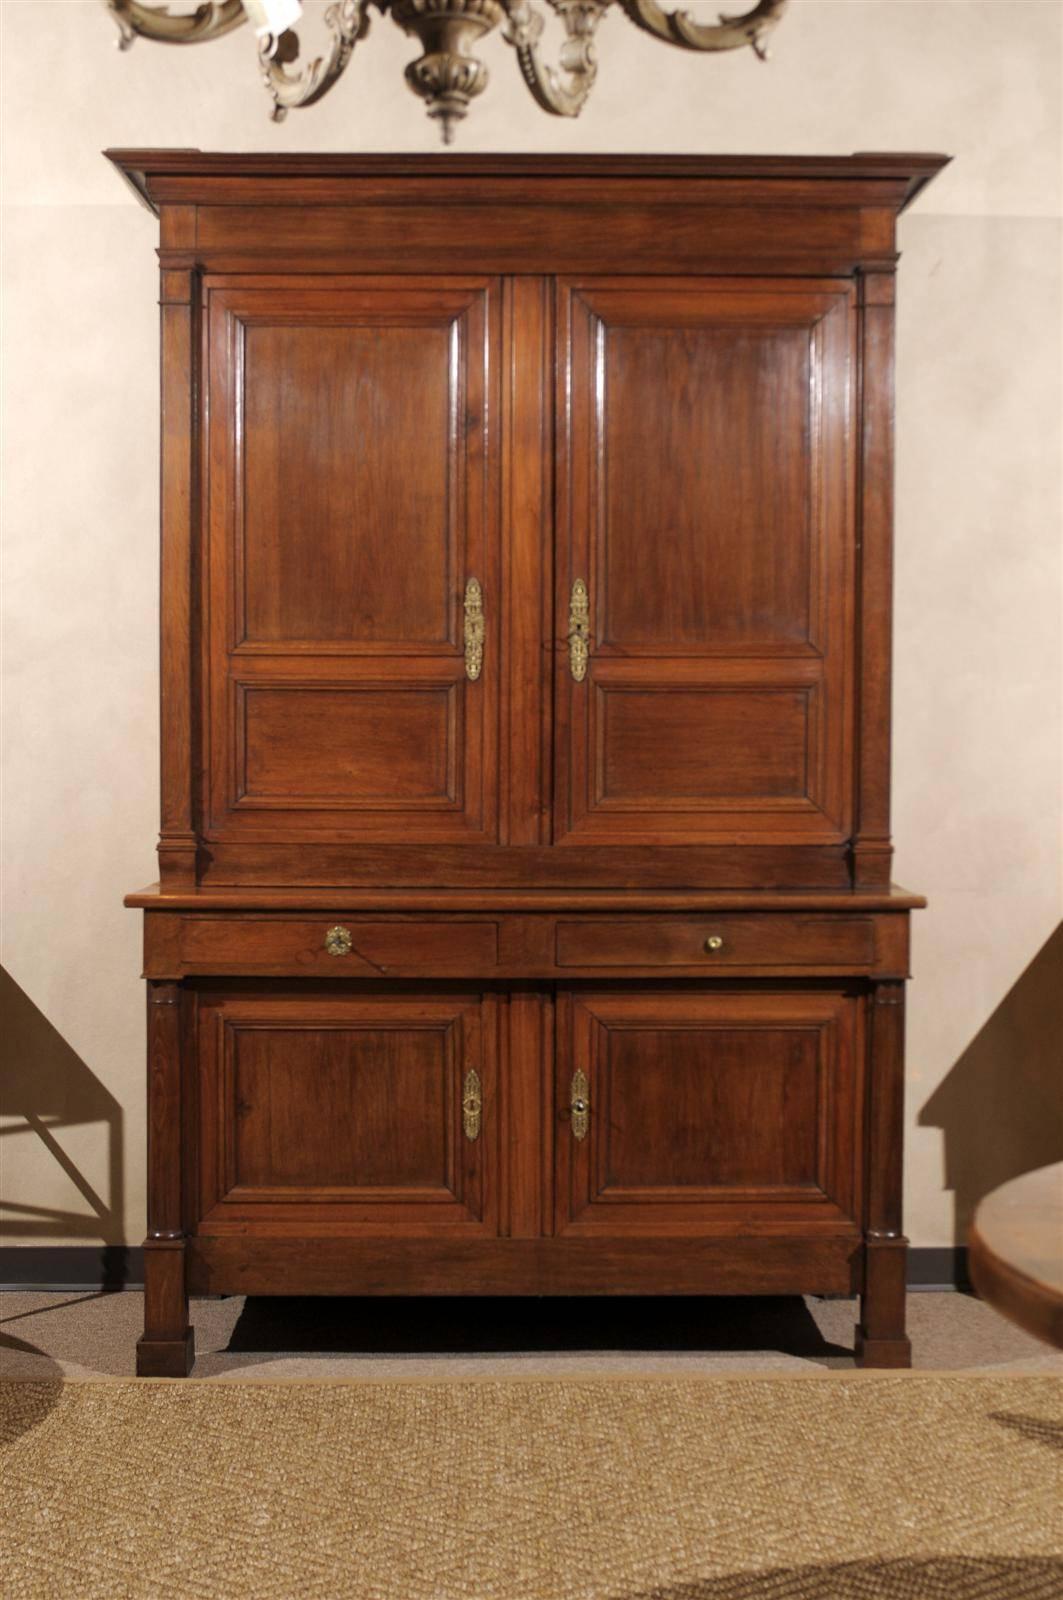 Found outside Chartres in a quaint old farmhouse, this Empire buffet deux corps is made from the French oak of the region. The wood has a wonderful patina and a very pleasing color tone. One might even think it's cherry from across the room. This